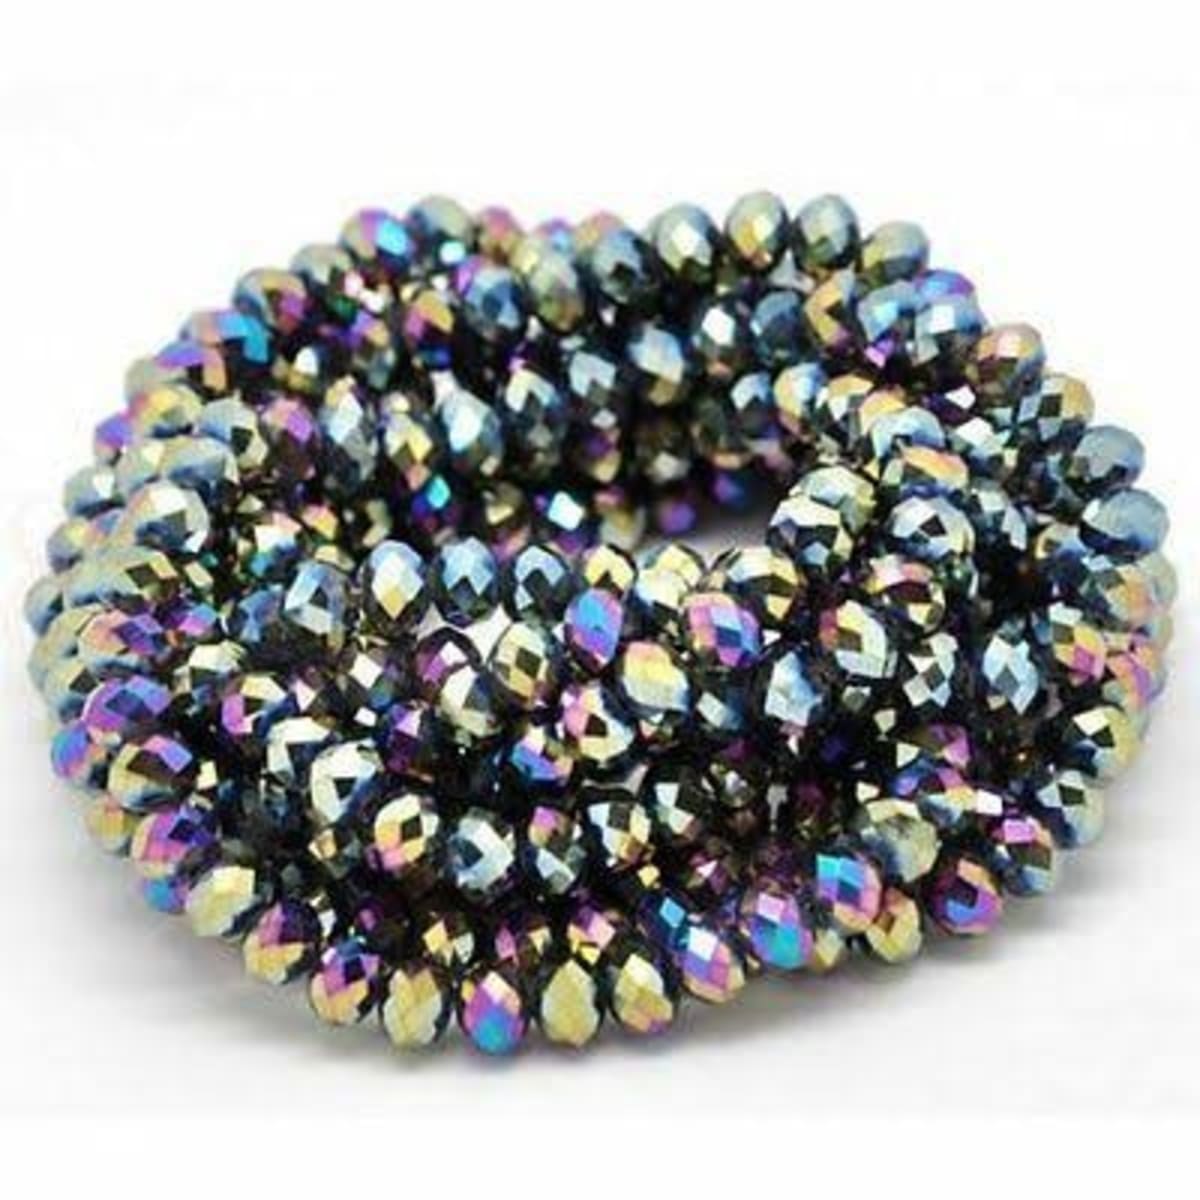 Crystal Waist Beads Wholesale (20 Pieces)